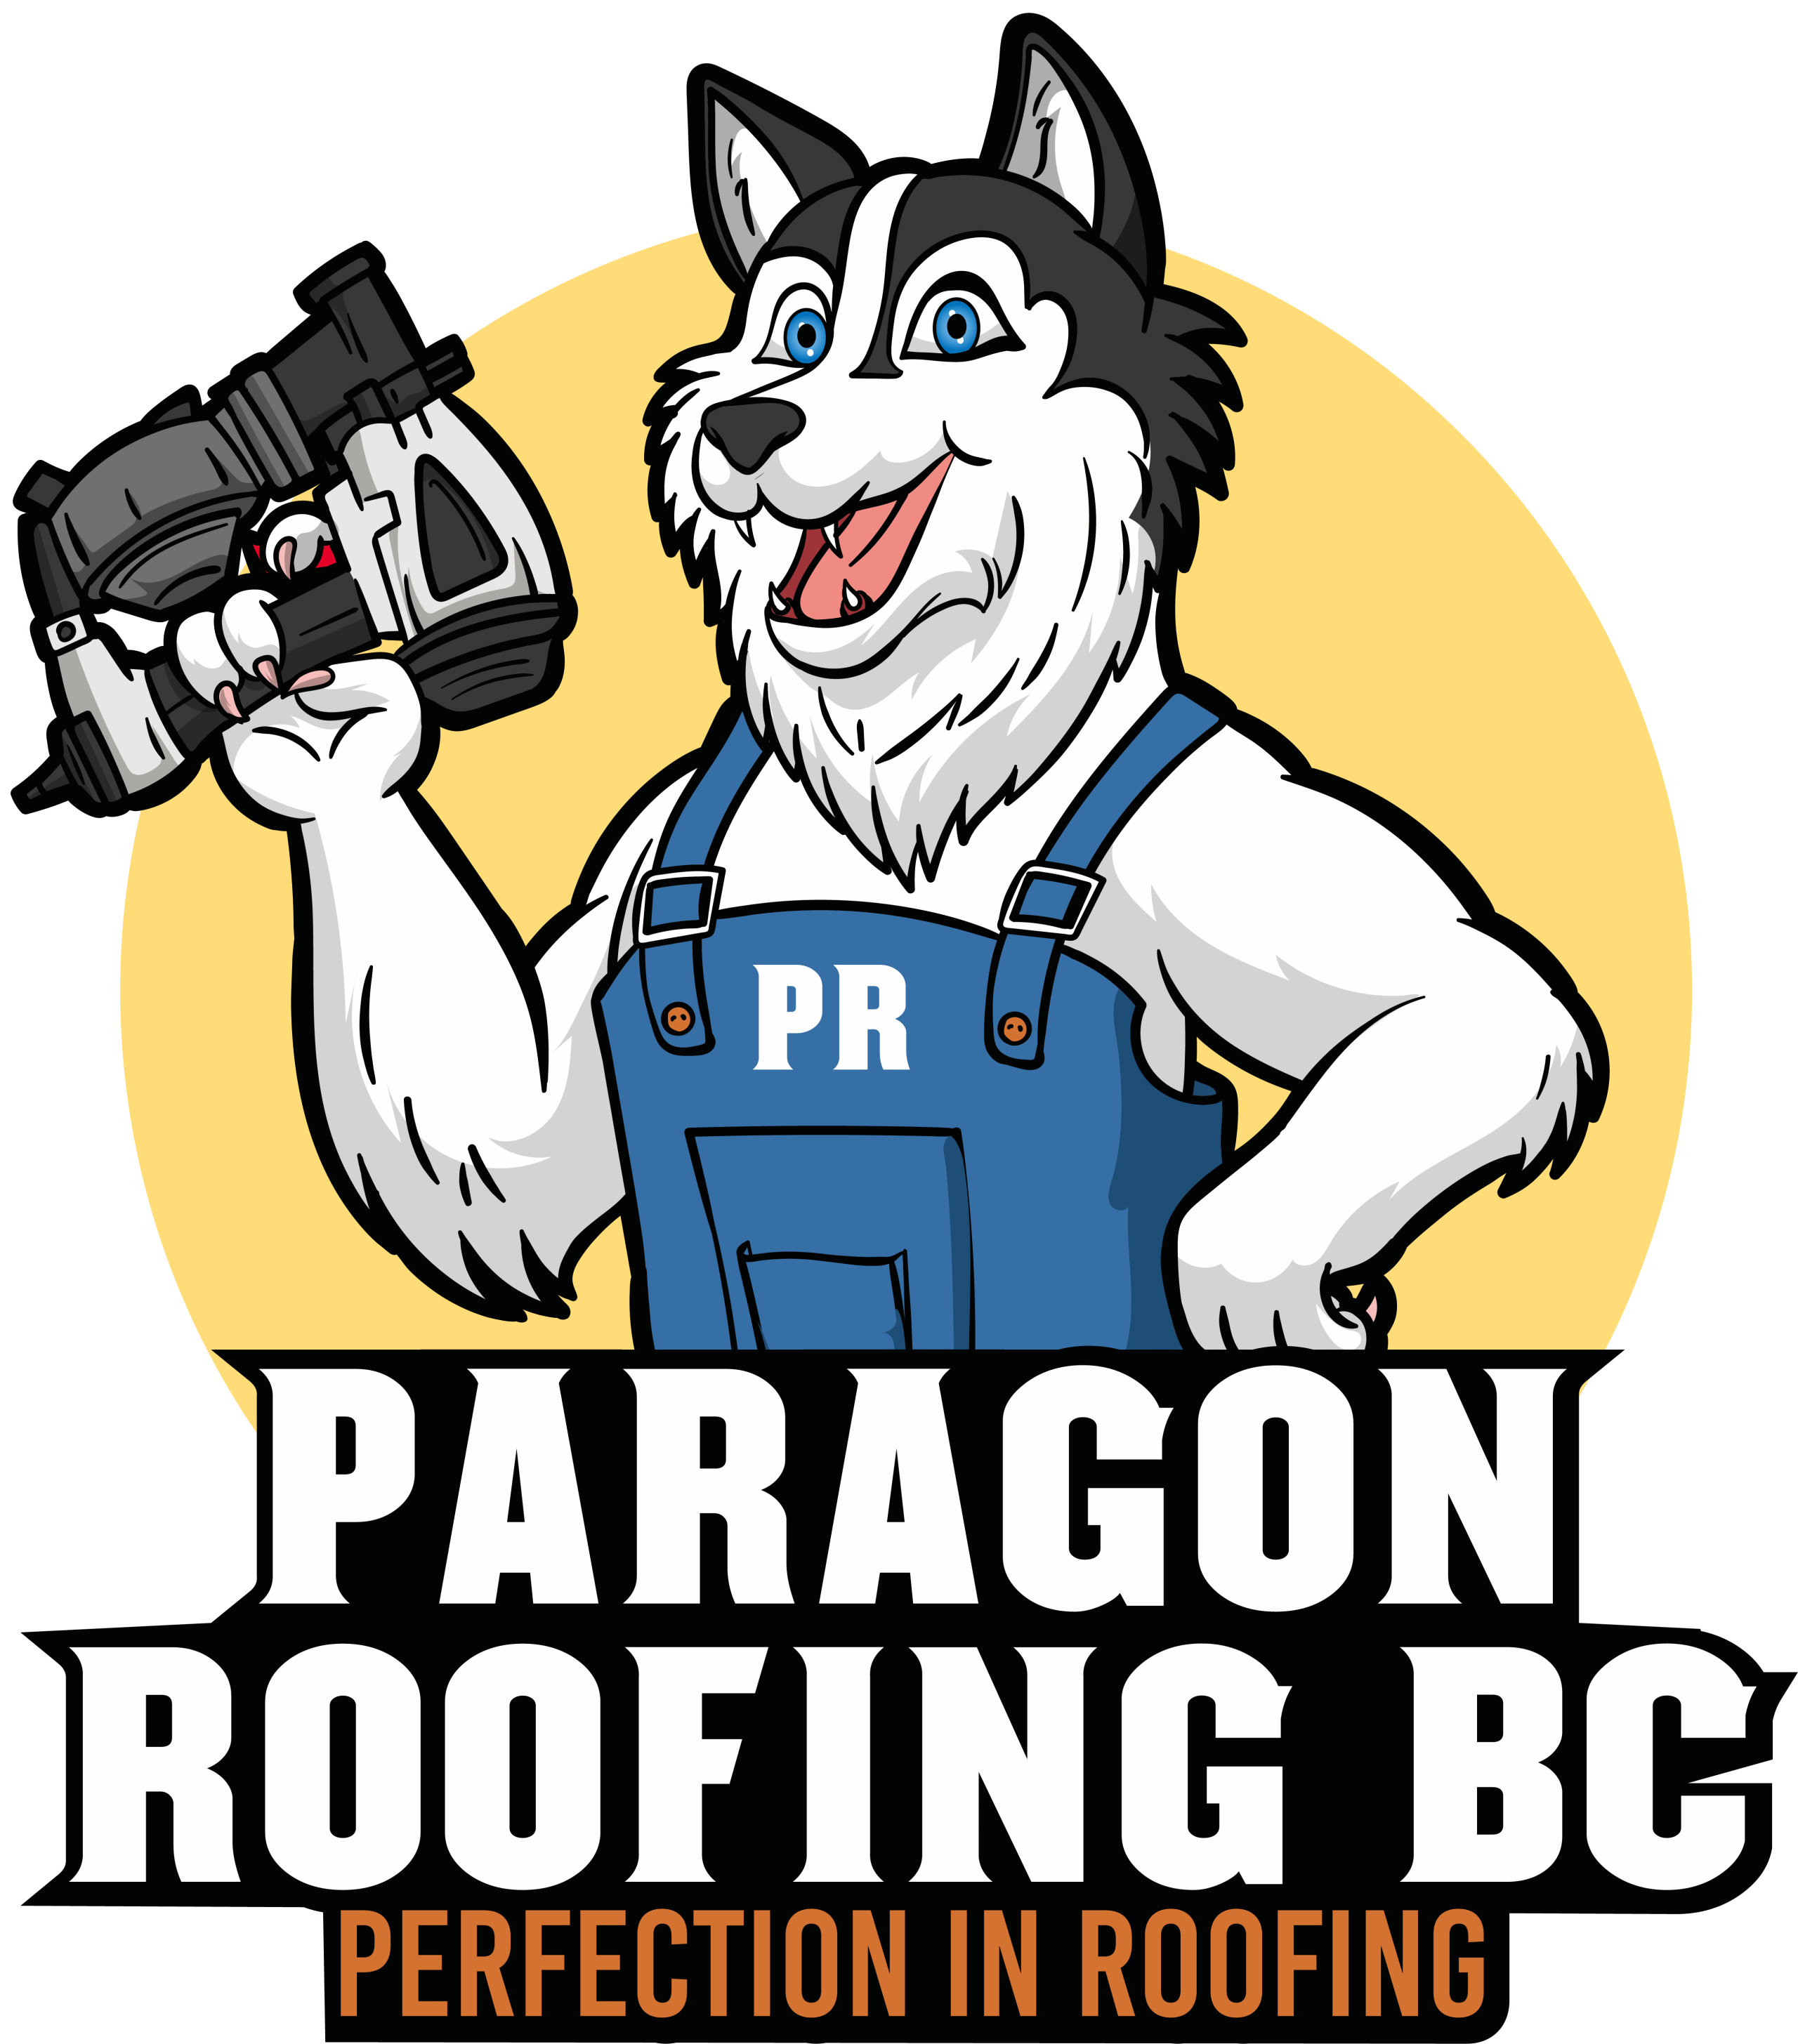 paragon roofing bc logo Vancouver Surrey Langley Richmond Roofing Roofer